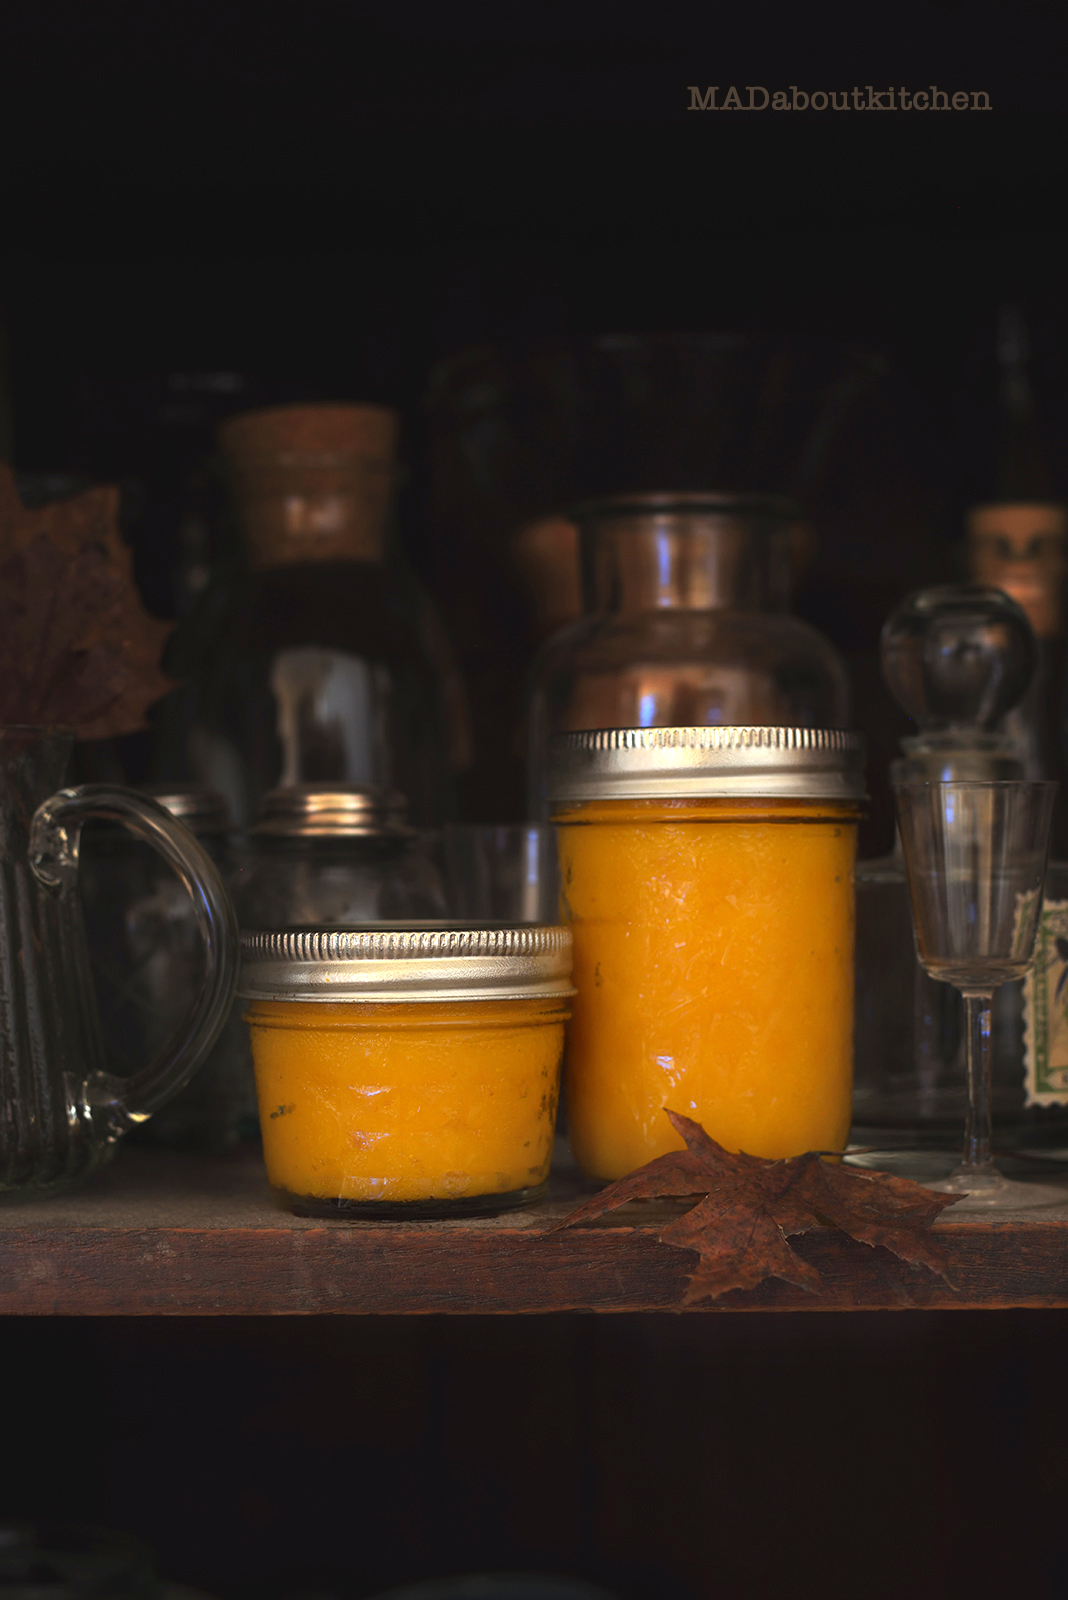 Here is how you can make Homemade Pumpkin Puree from scratch and store it to use in all your favourite autumn recipes. It makes your life so much easier.